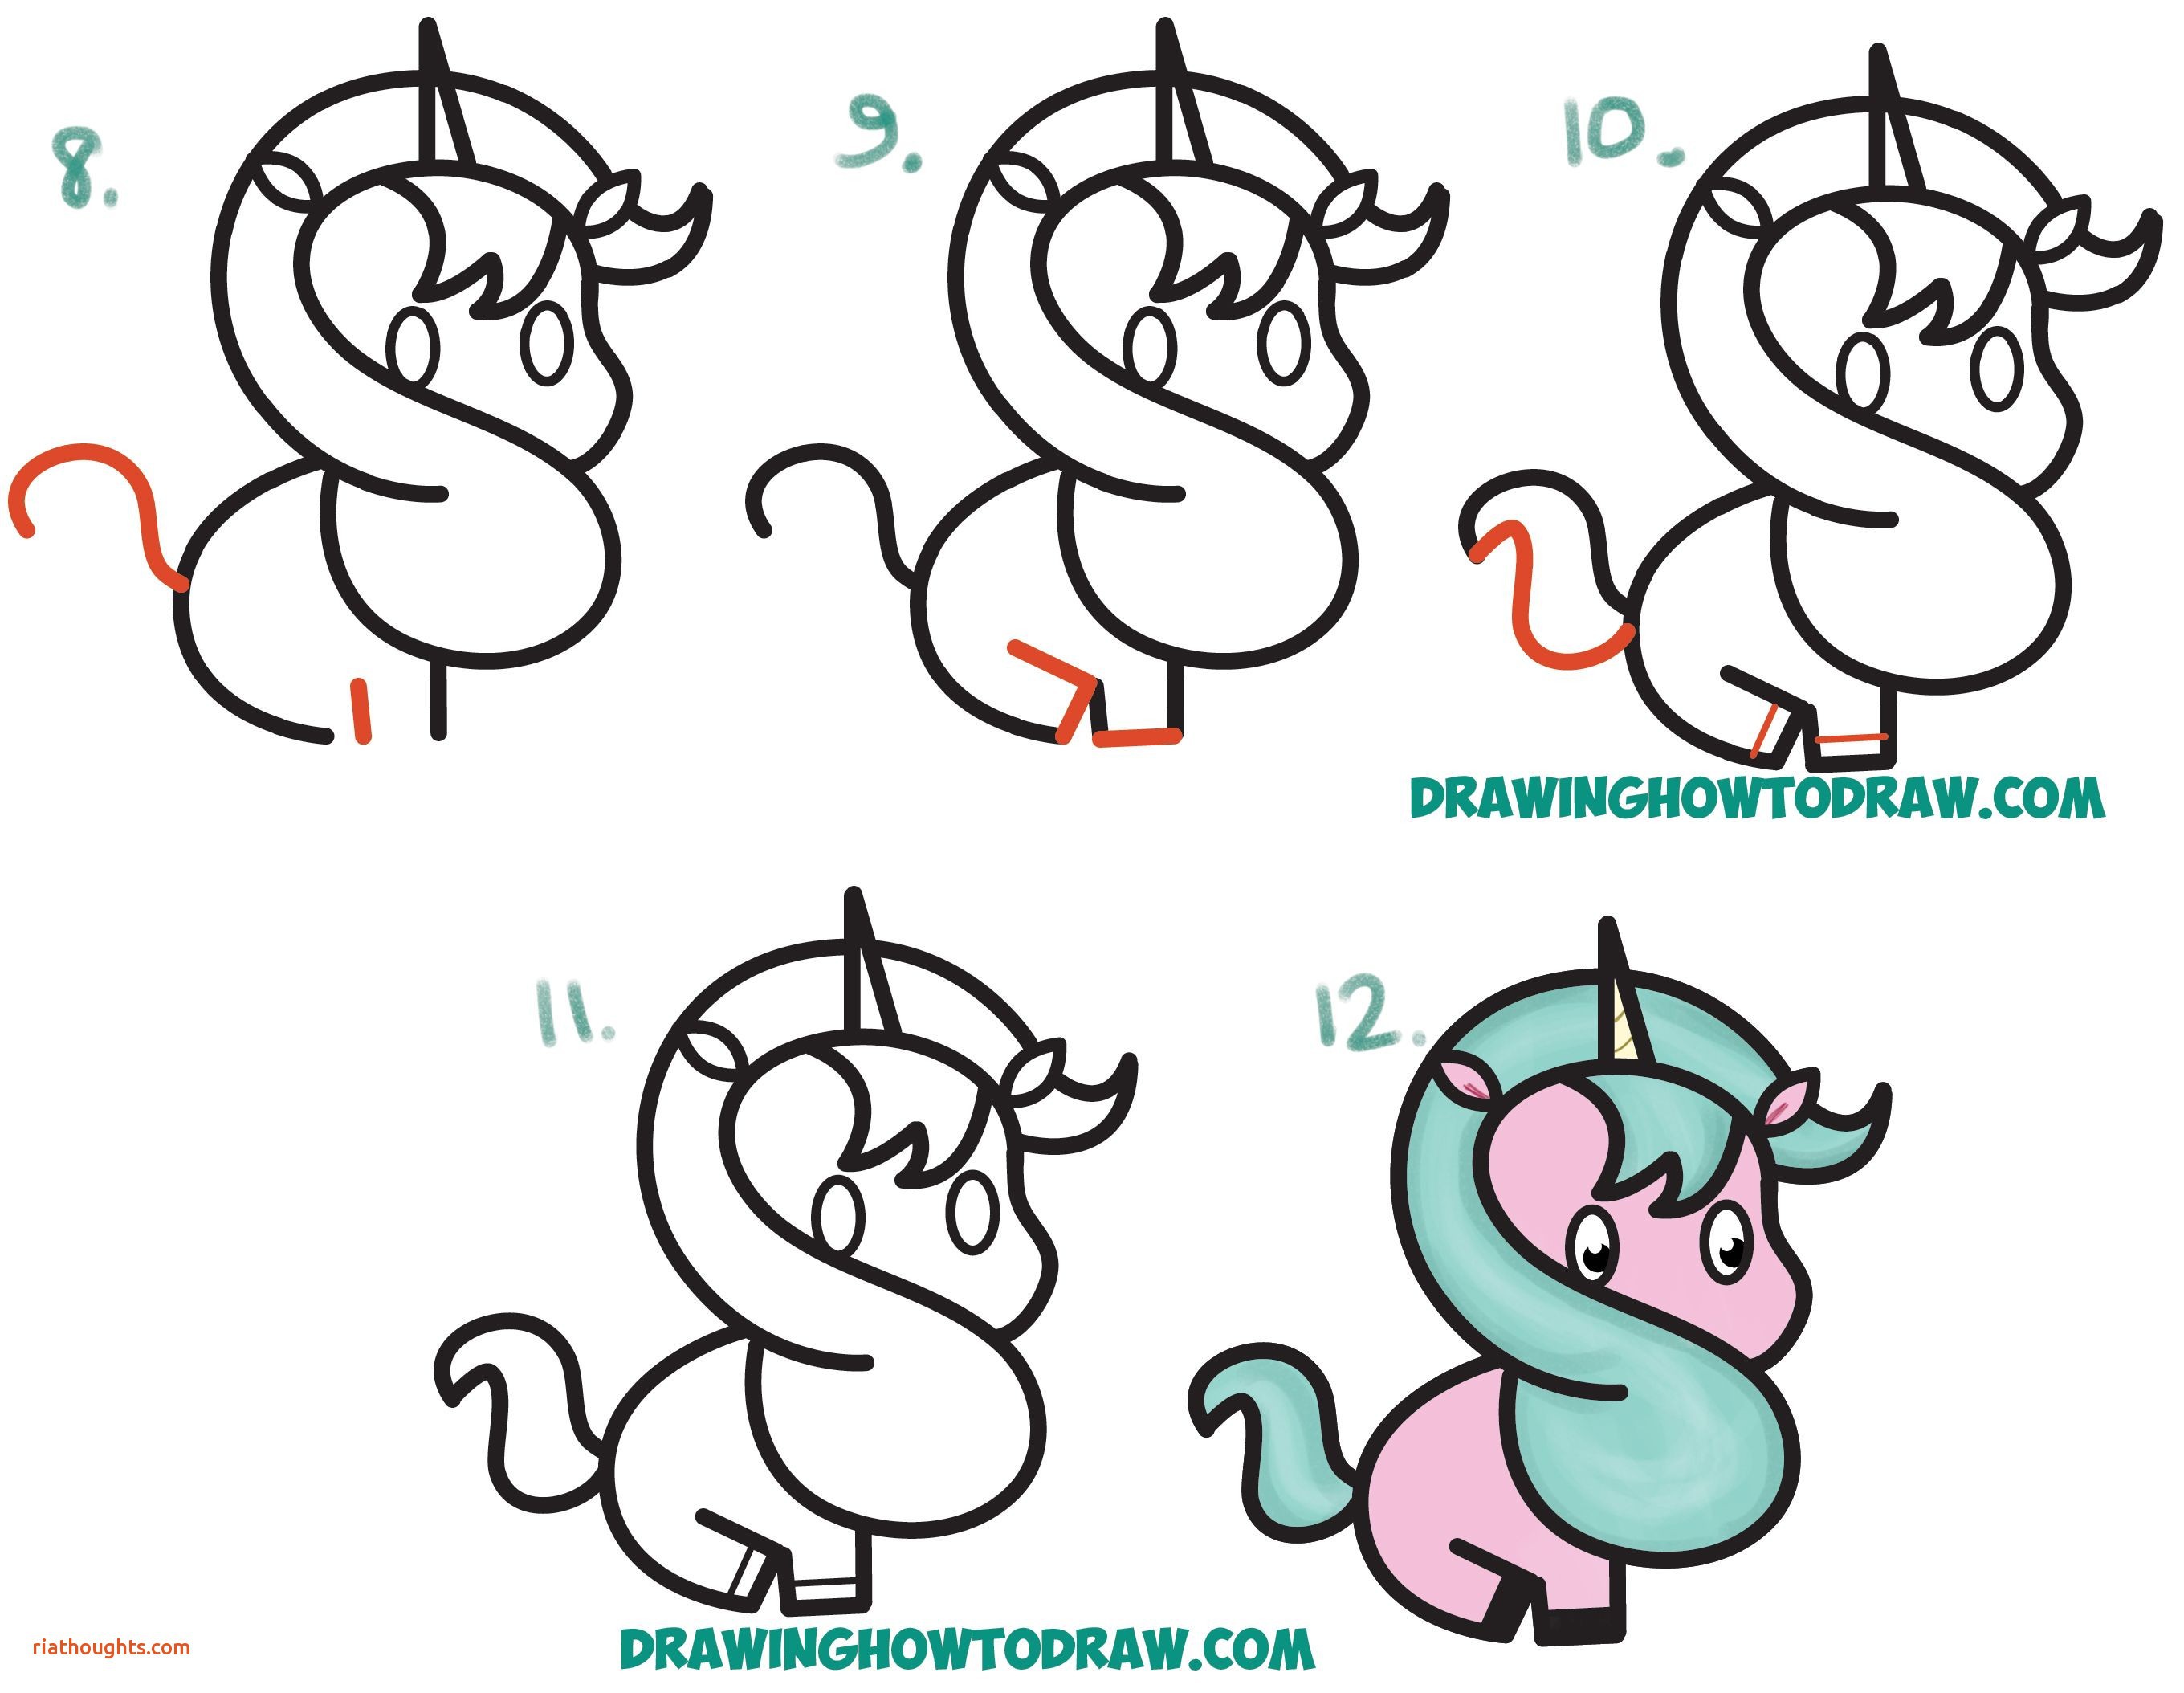 How to Draw a Cute Cartoon Unicorn Kawaii from a Dollar Sign Easy Step by Step